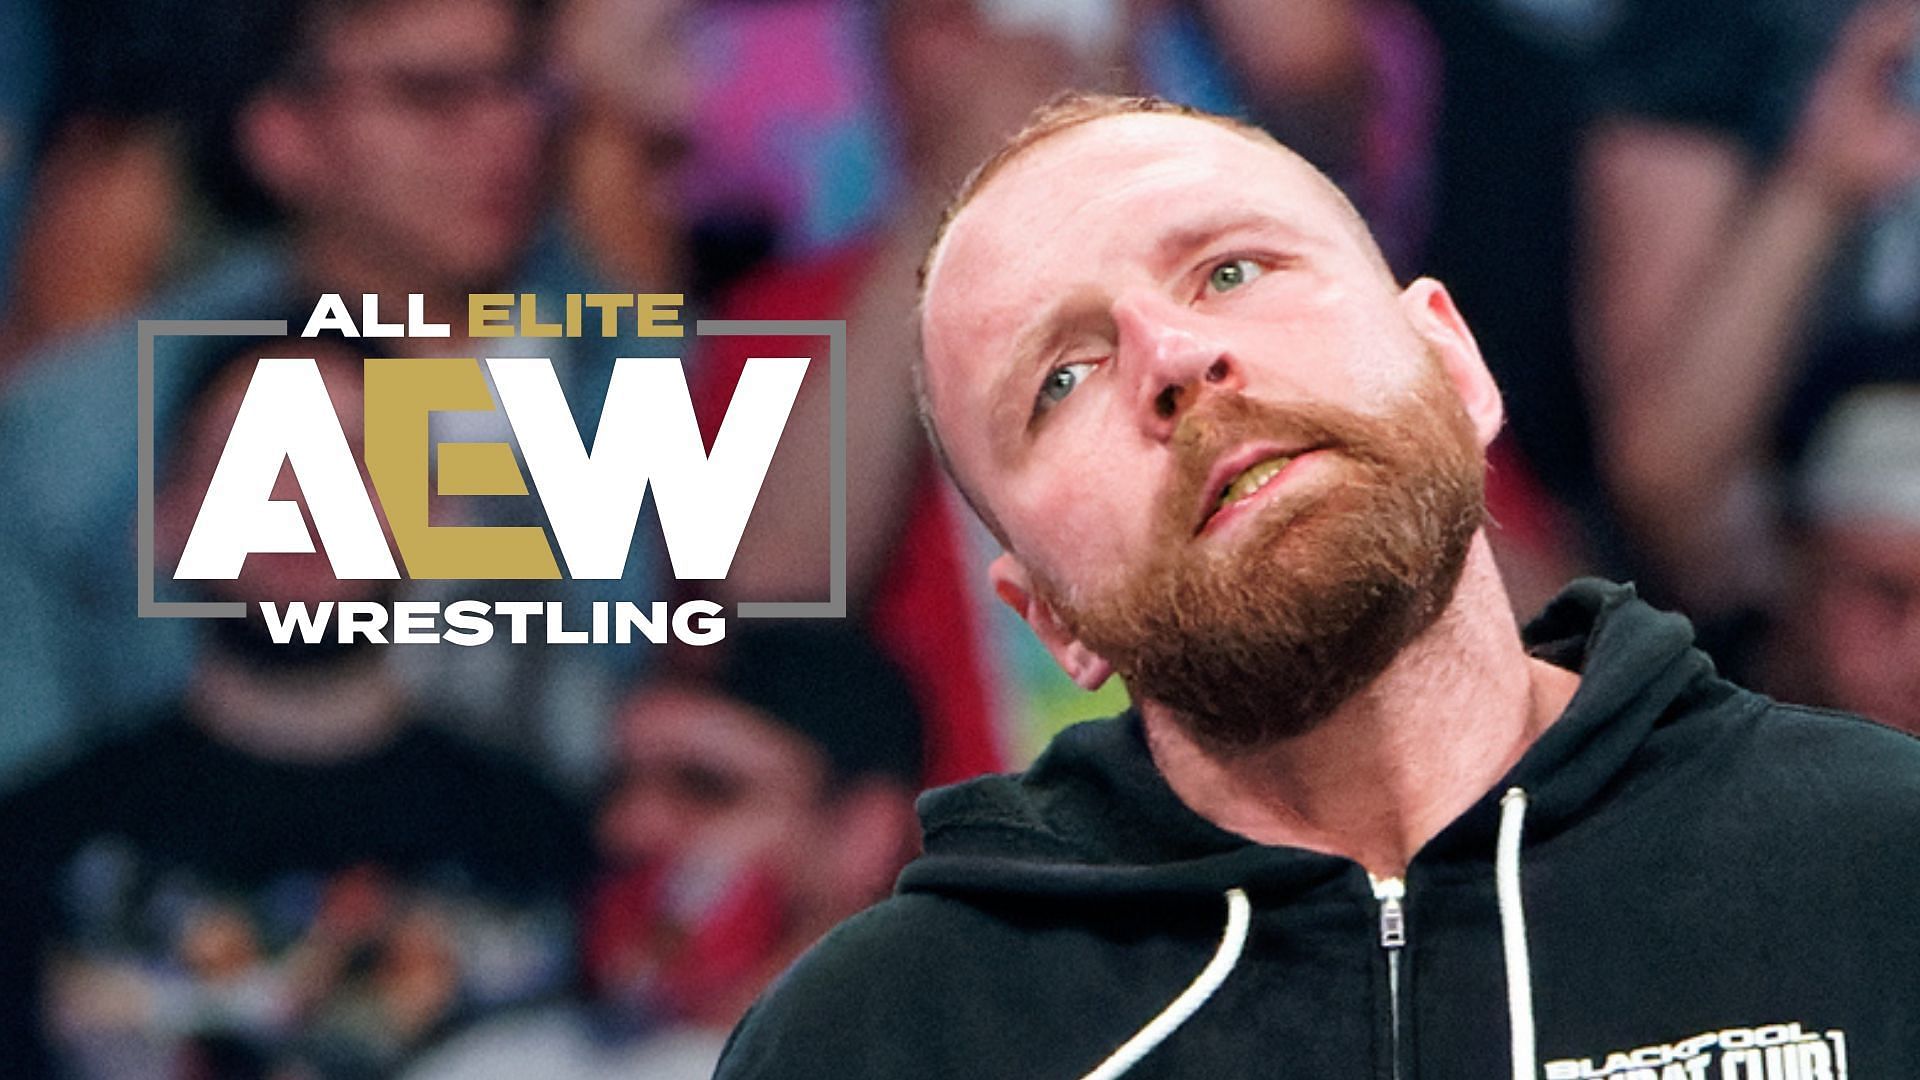 Jon Moxley is returning to a major international promotion